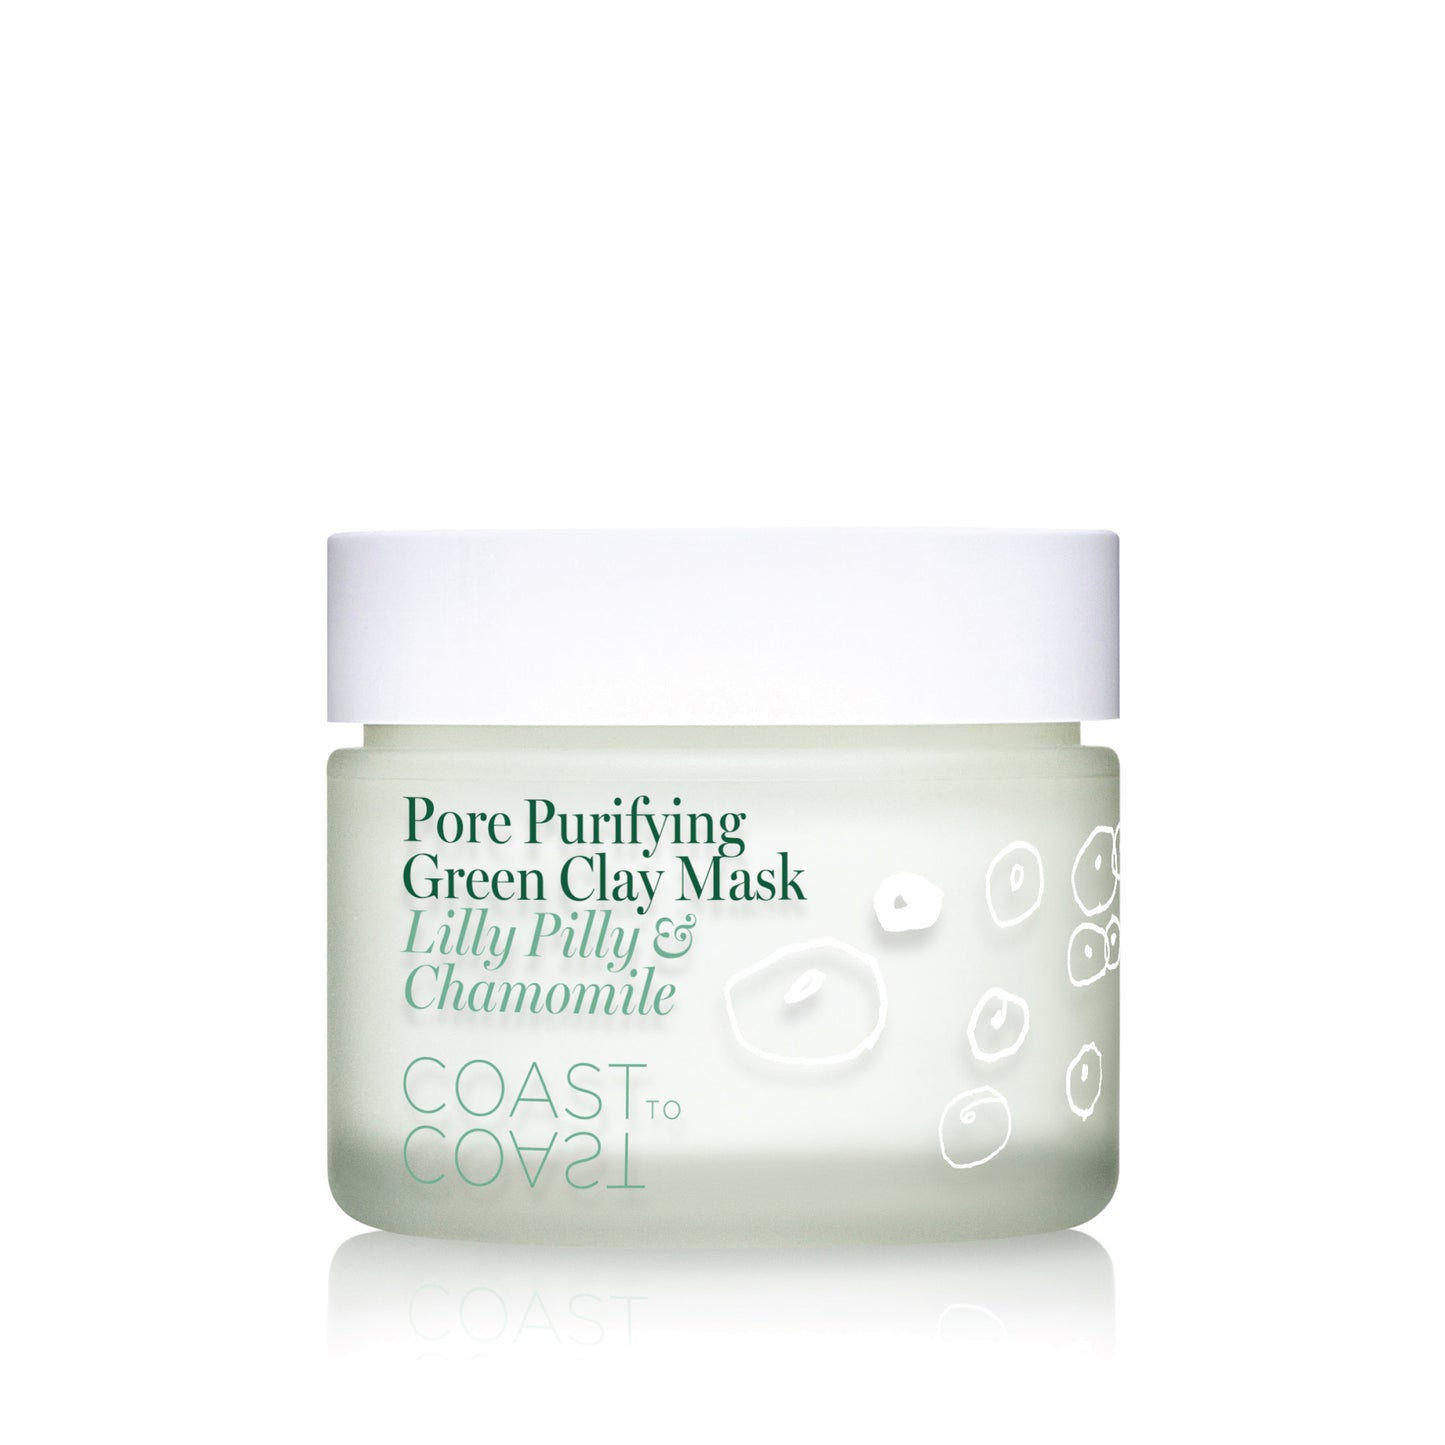 Pore Purifying Green Clay Mask